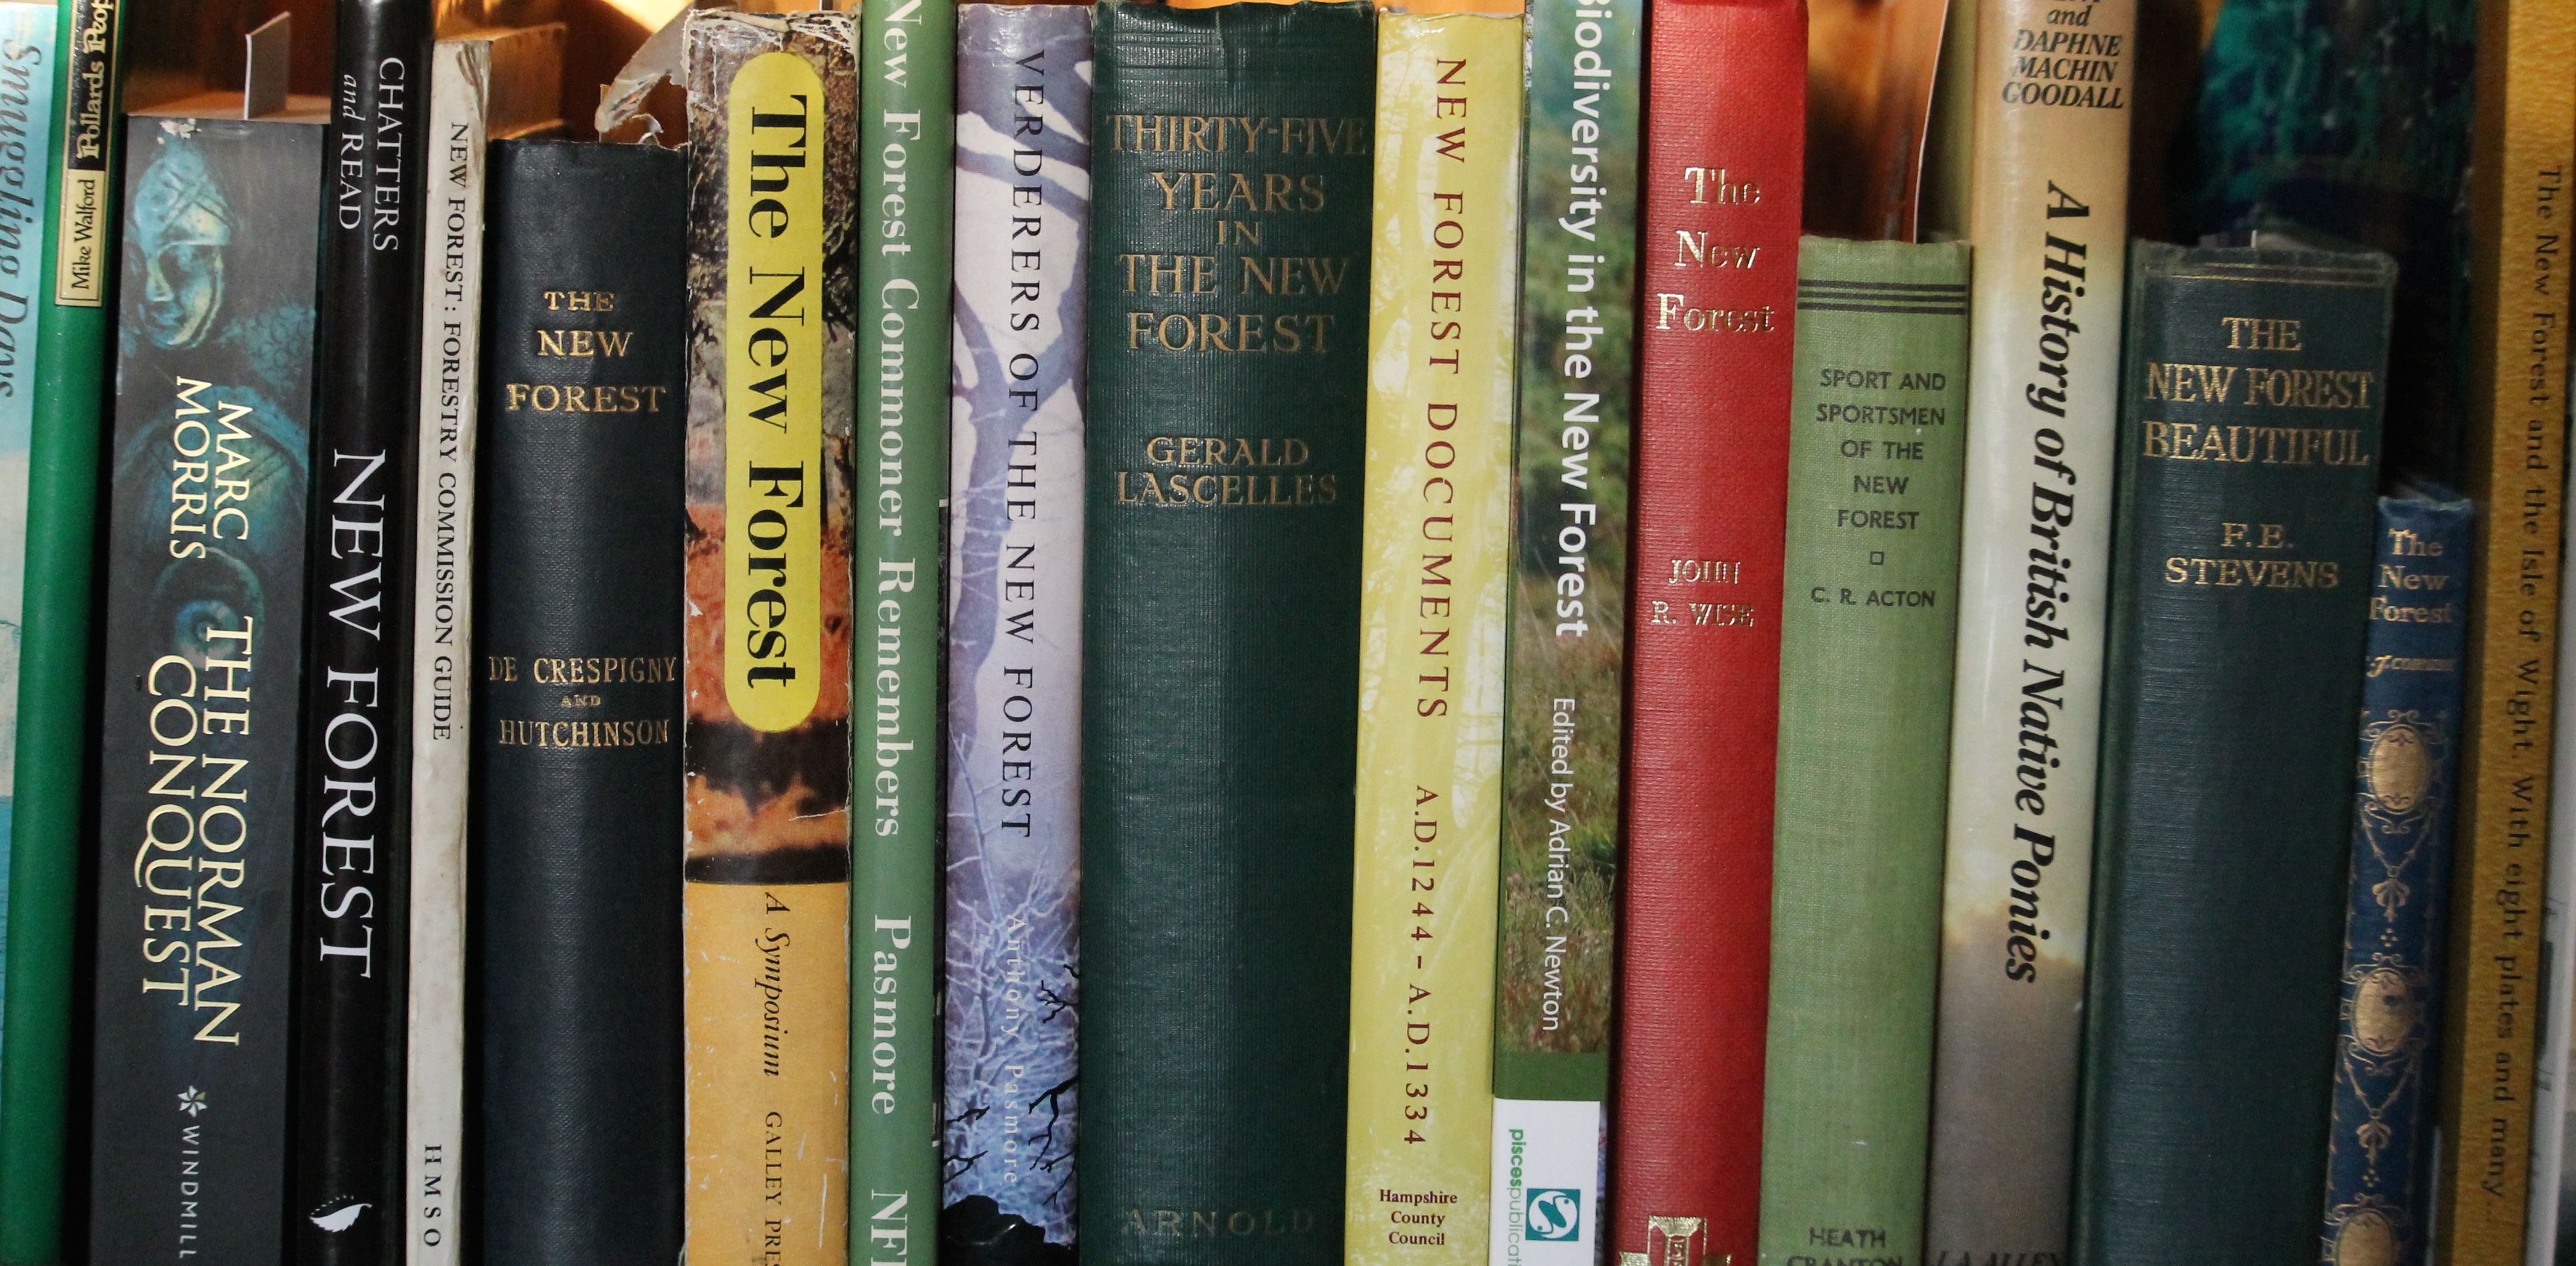 A sample of books on the New Forest.